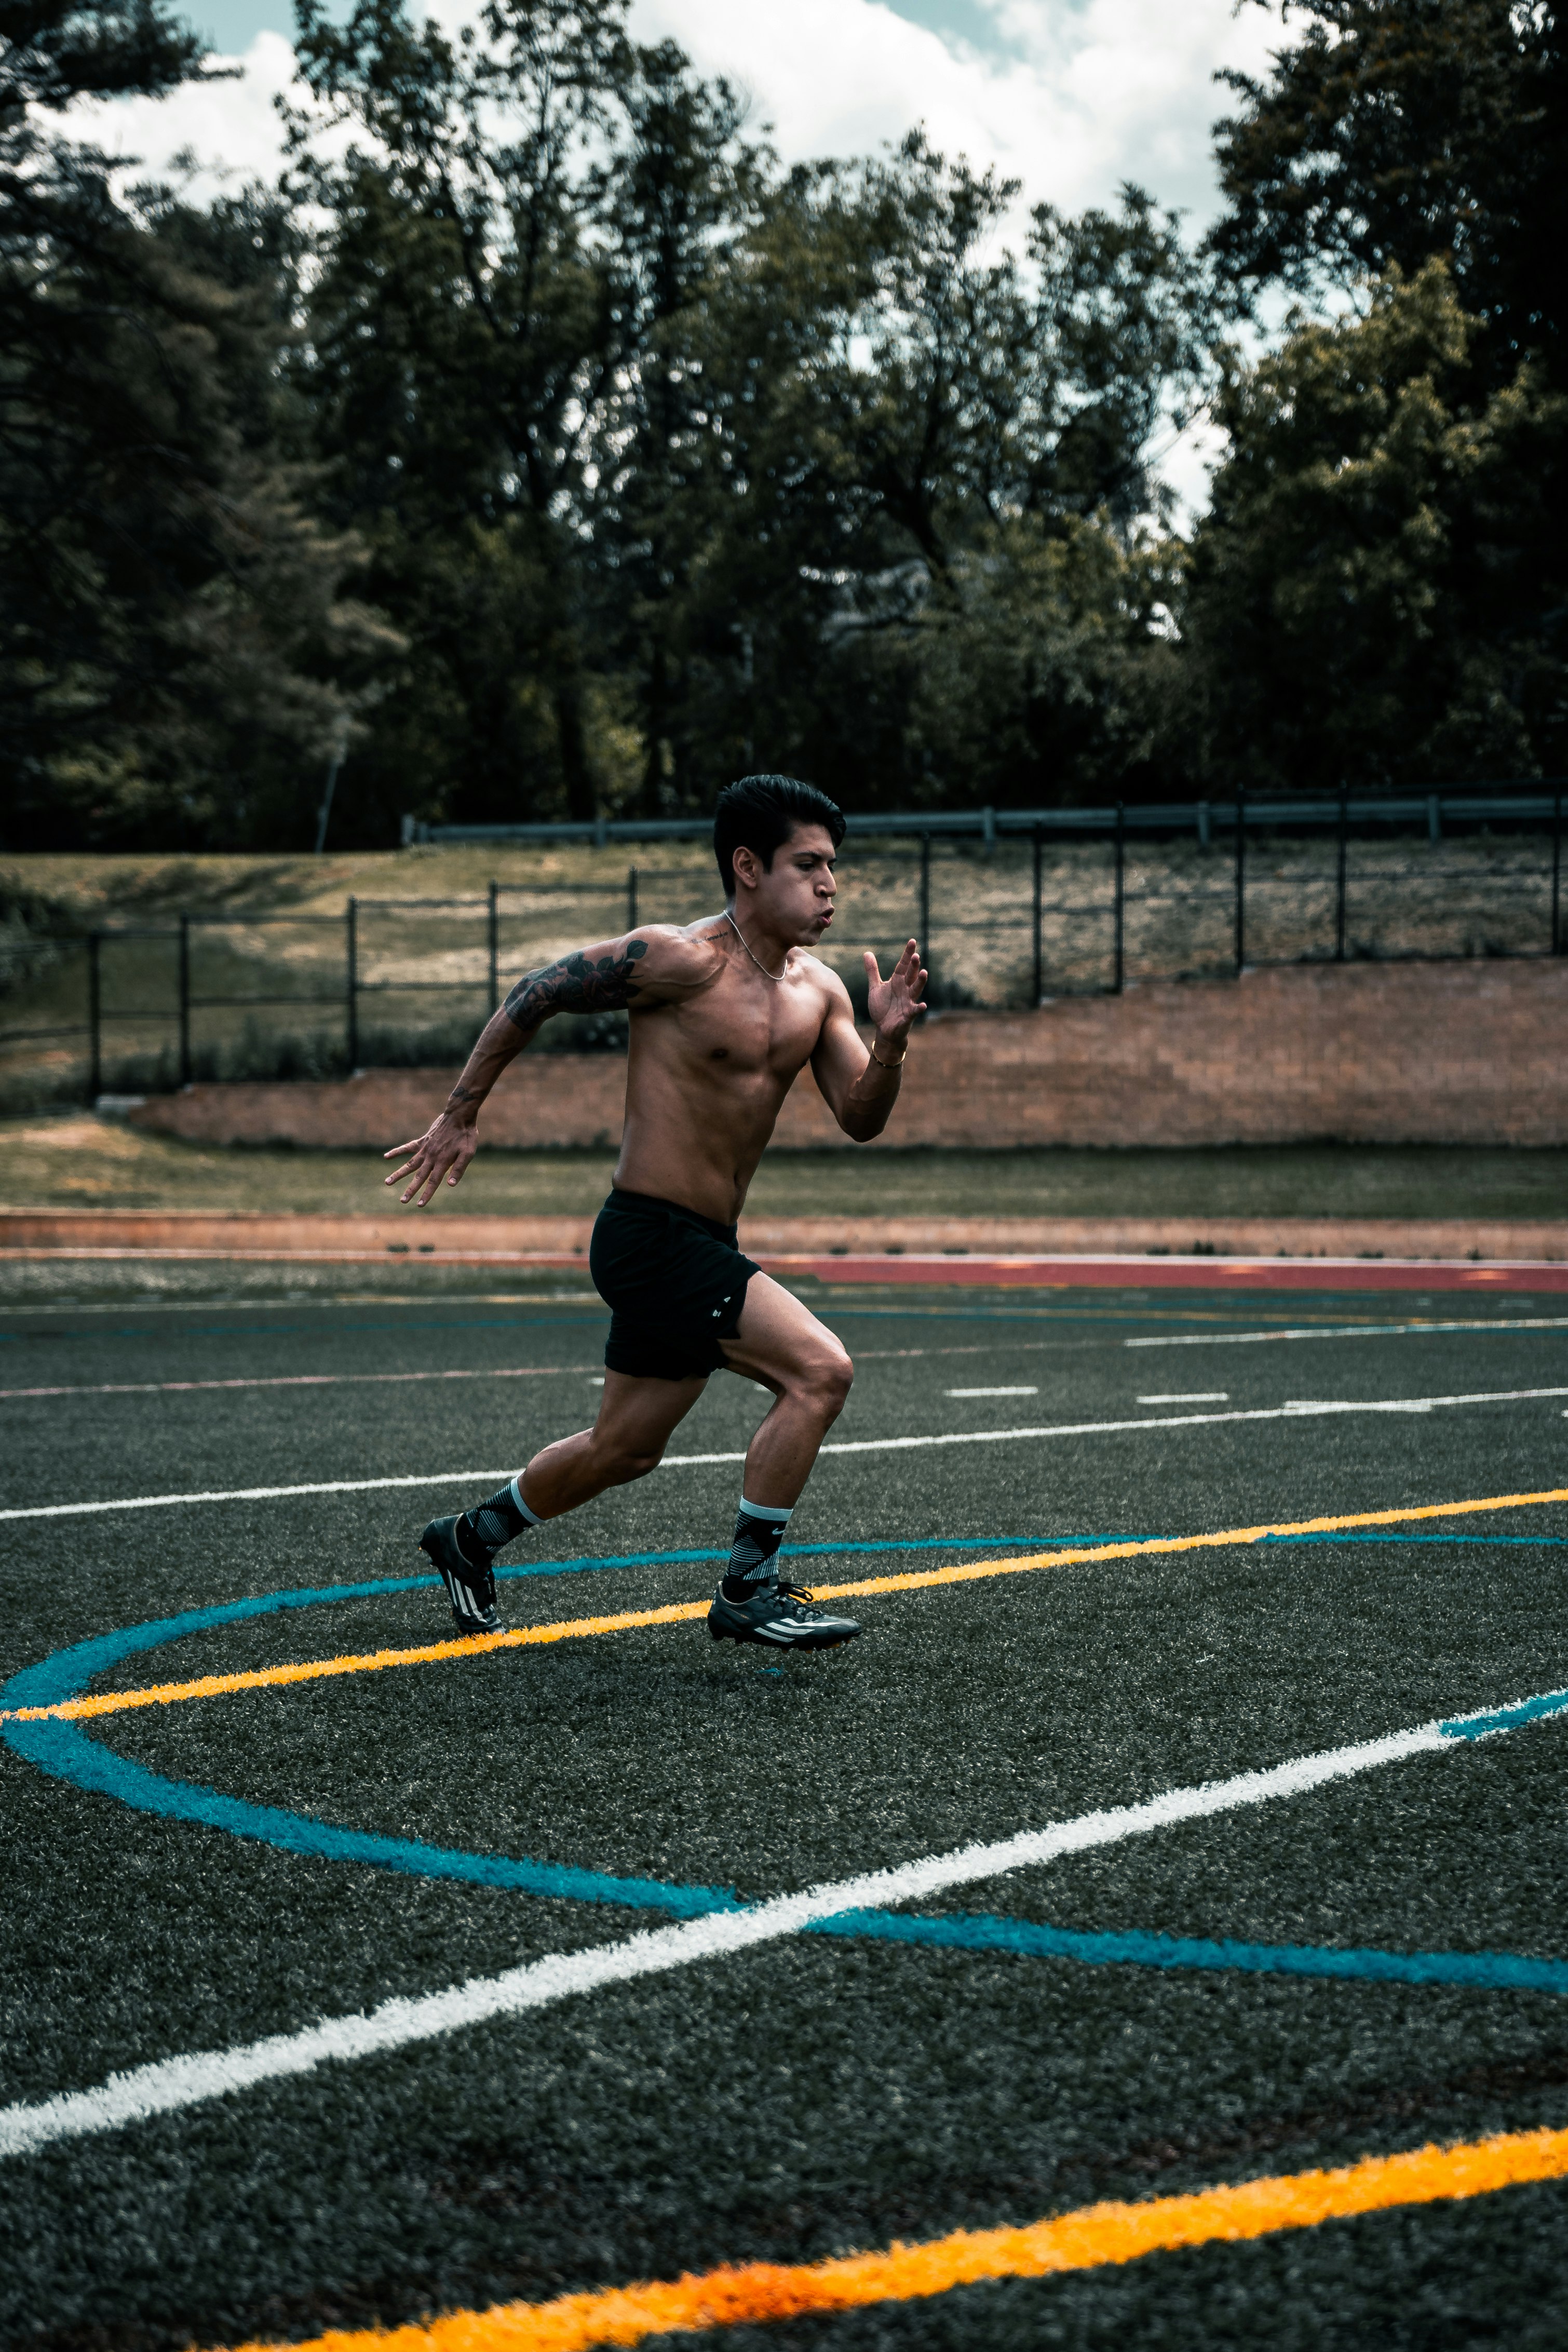 man in black shorts running on track field during daytime